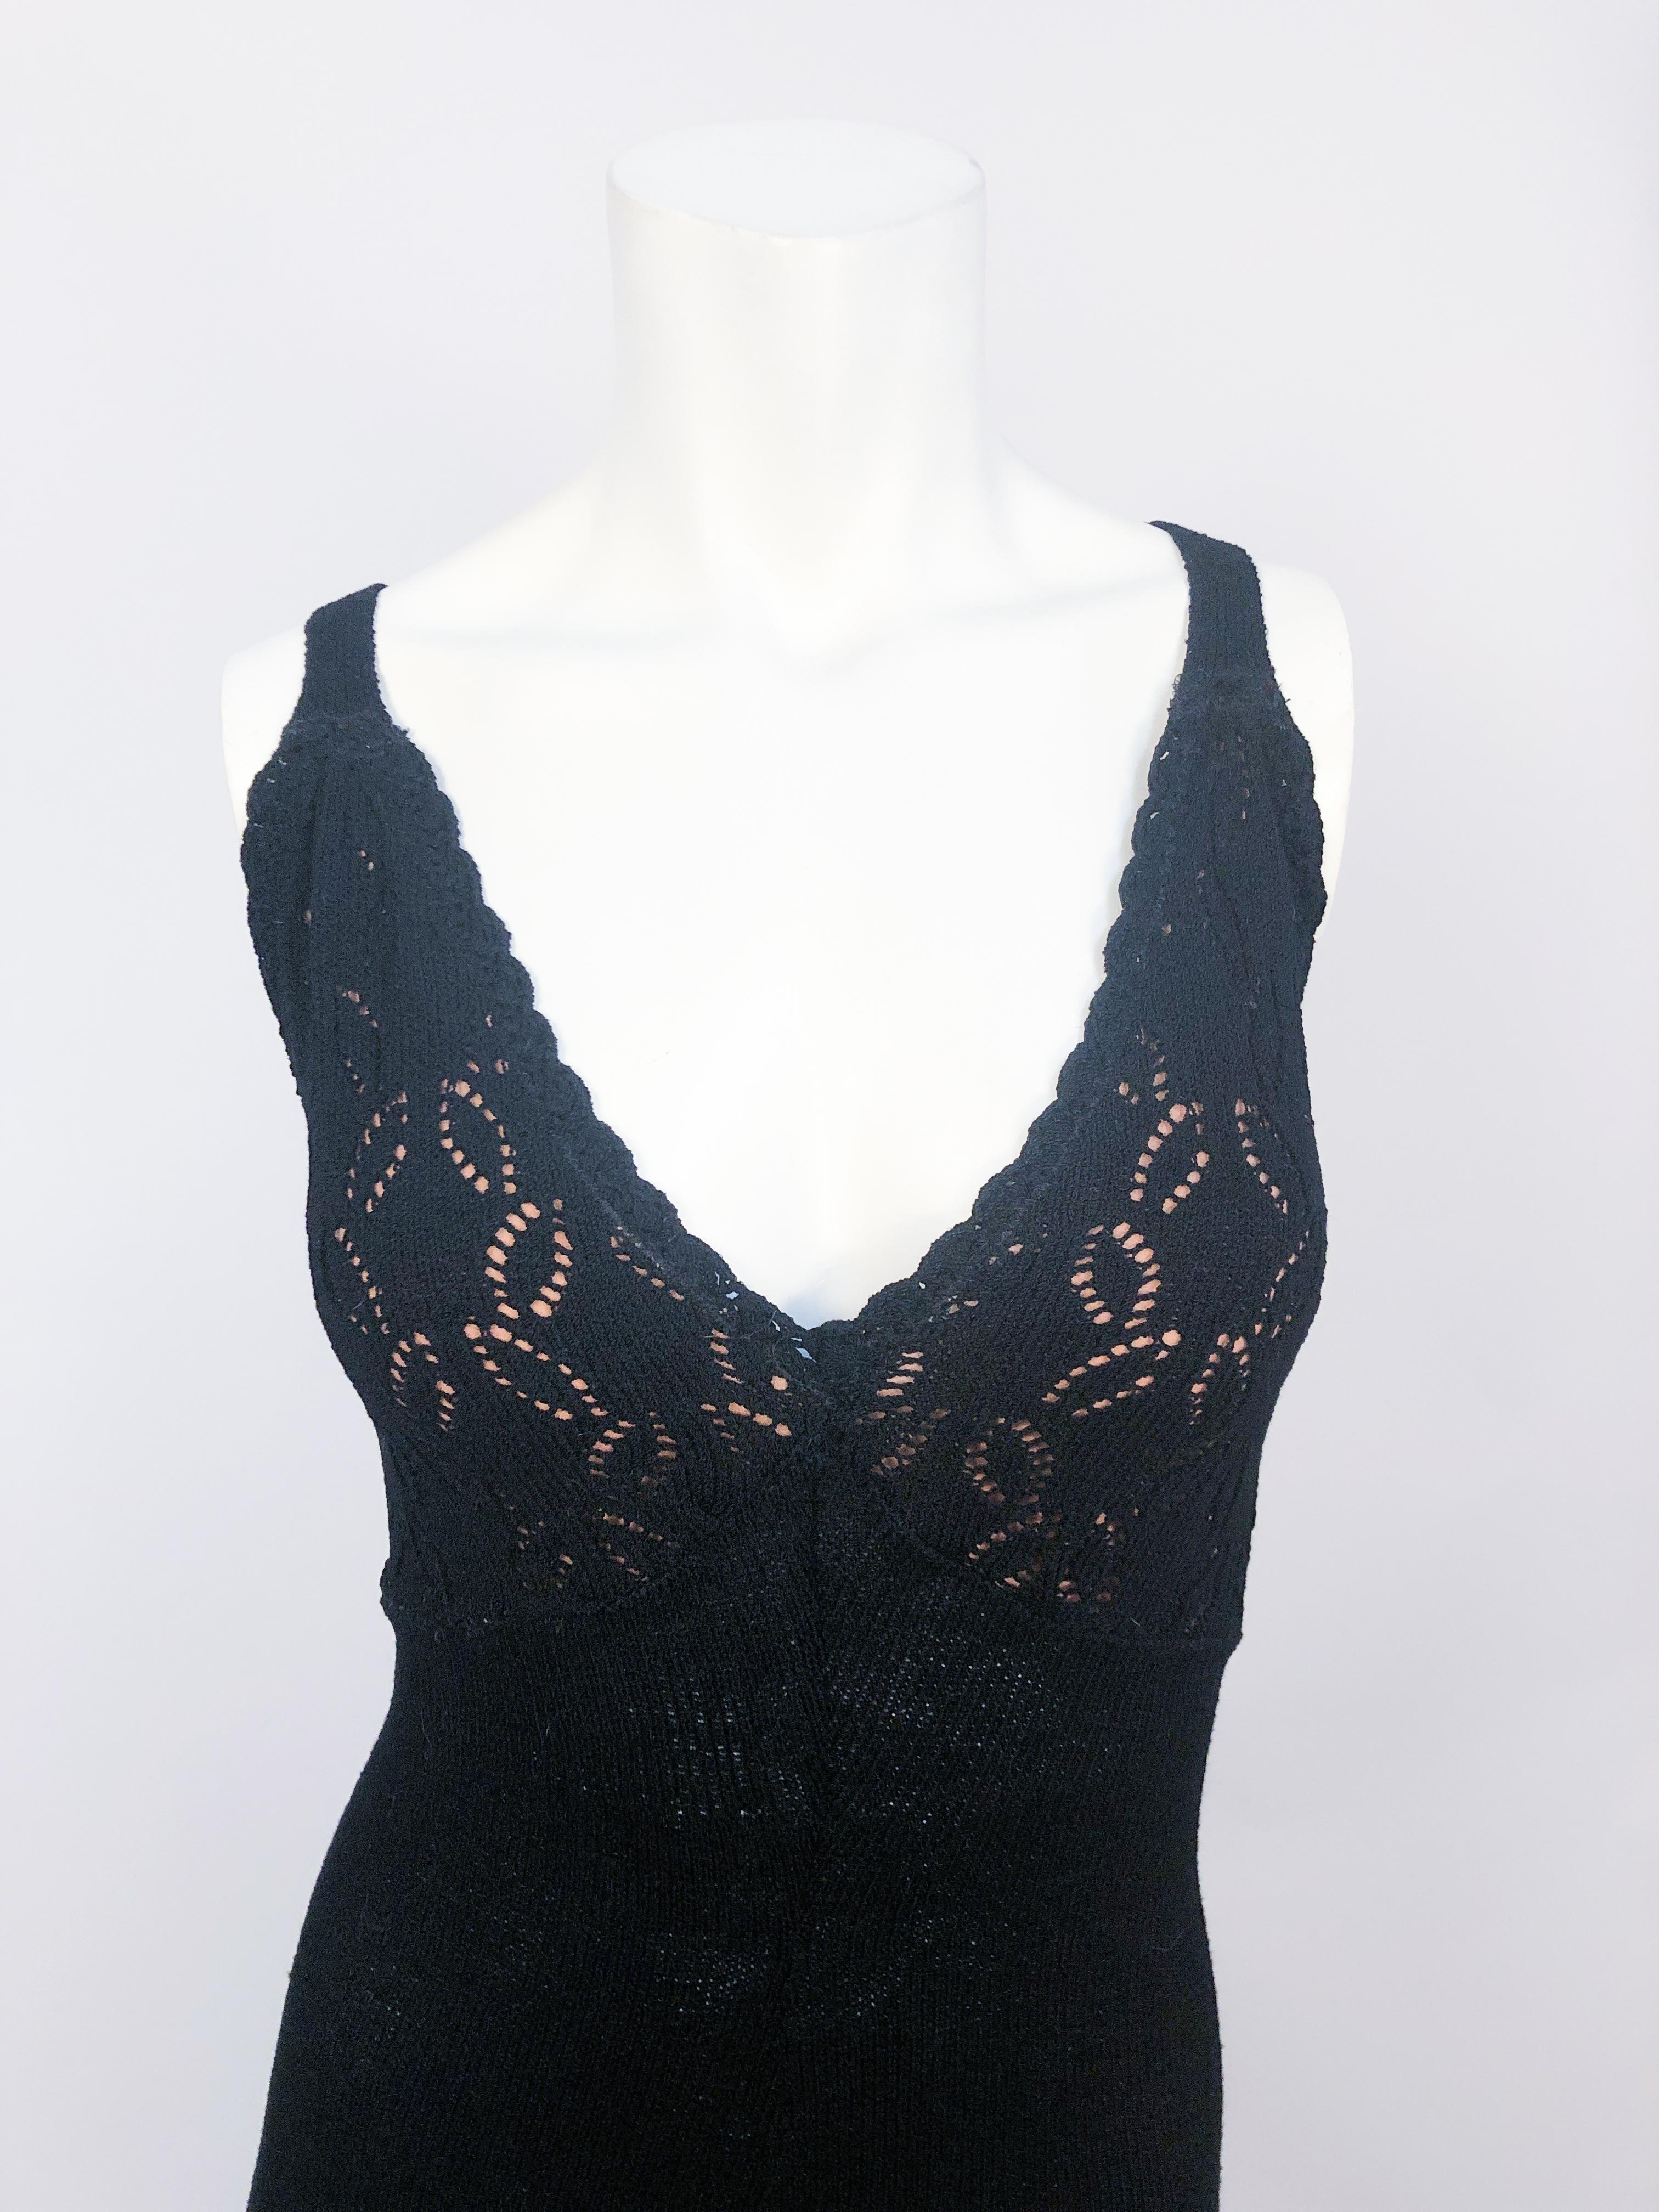 1970s Black Knit Jumpsuit with detailed pull work along the bodice and hem of the bell bottoms pants. The straps are cross-backed.